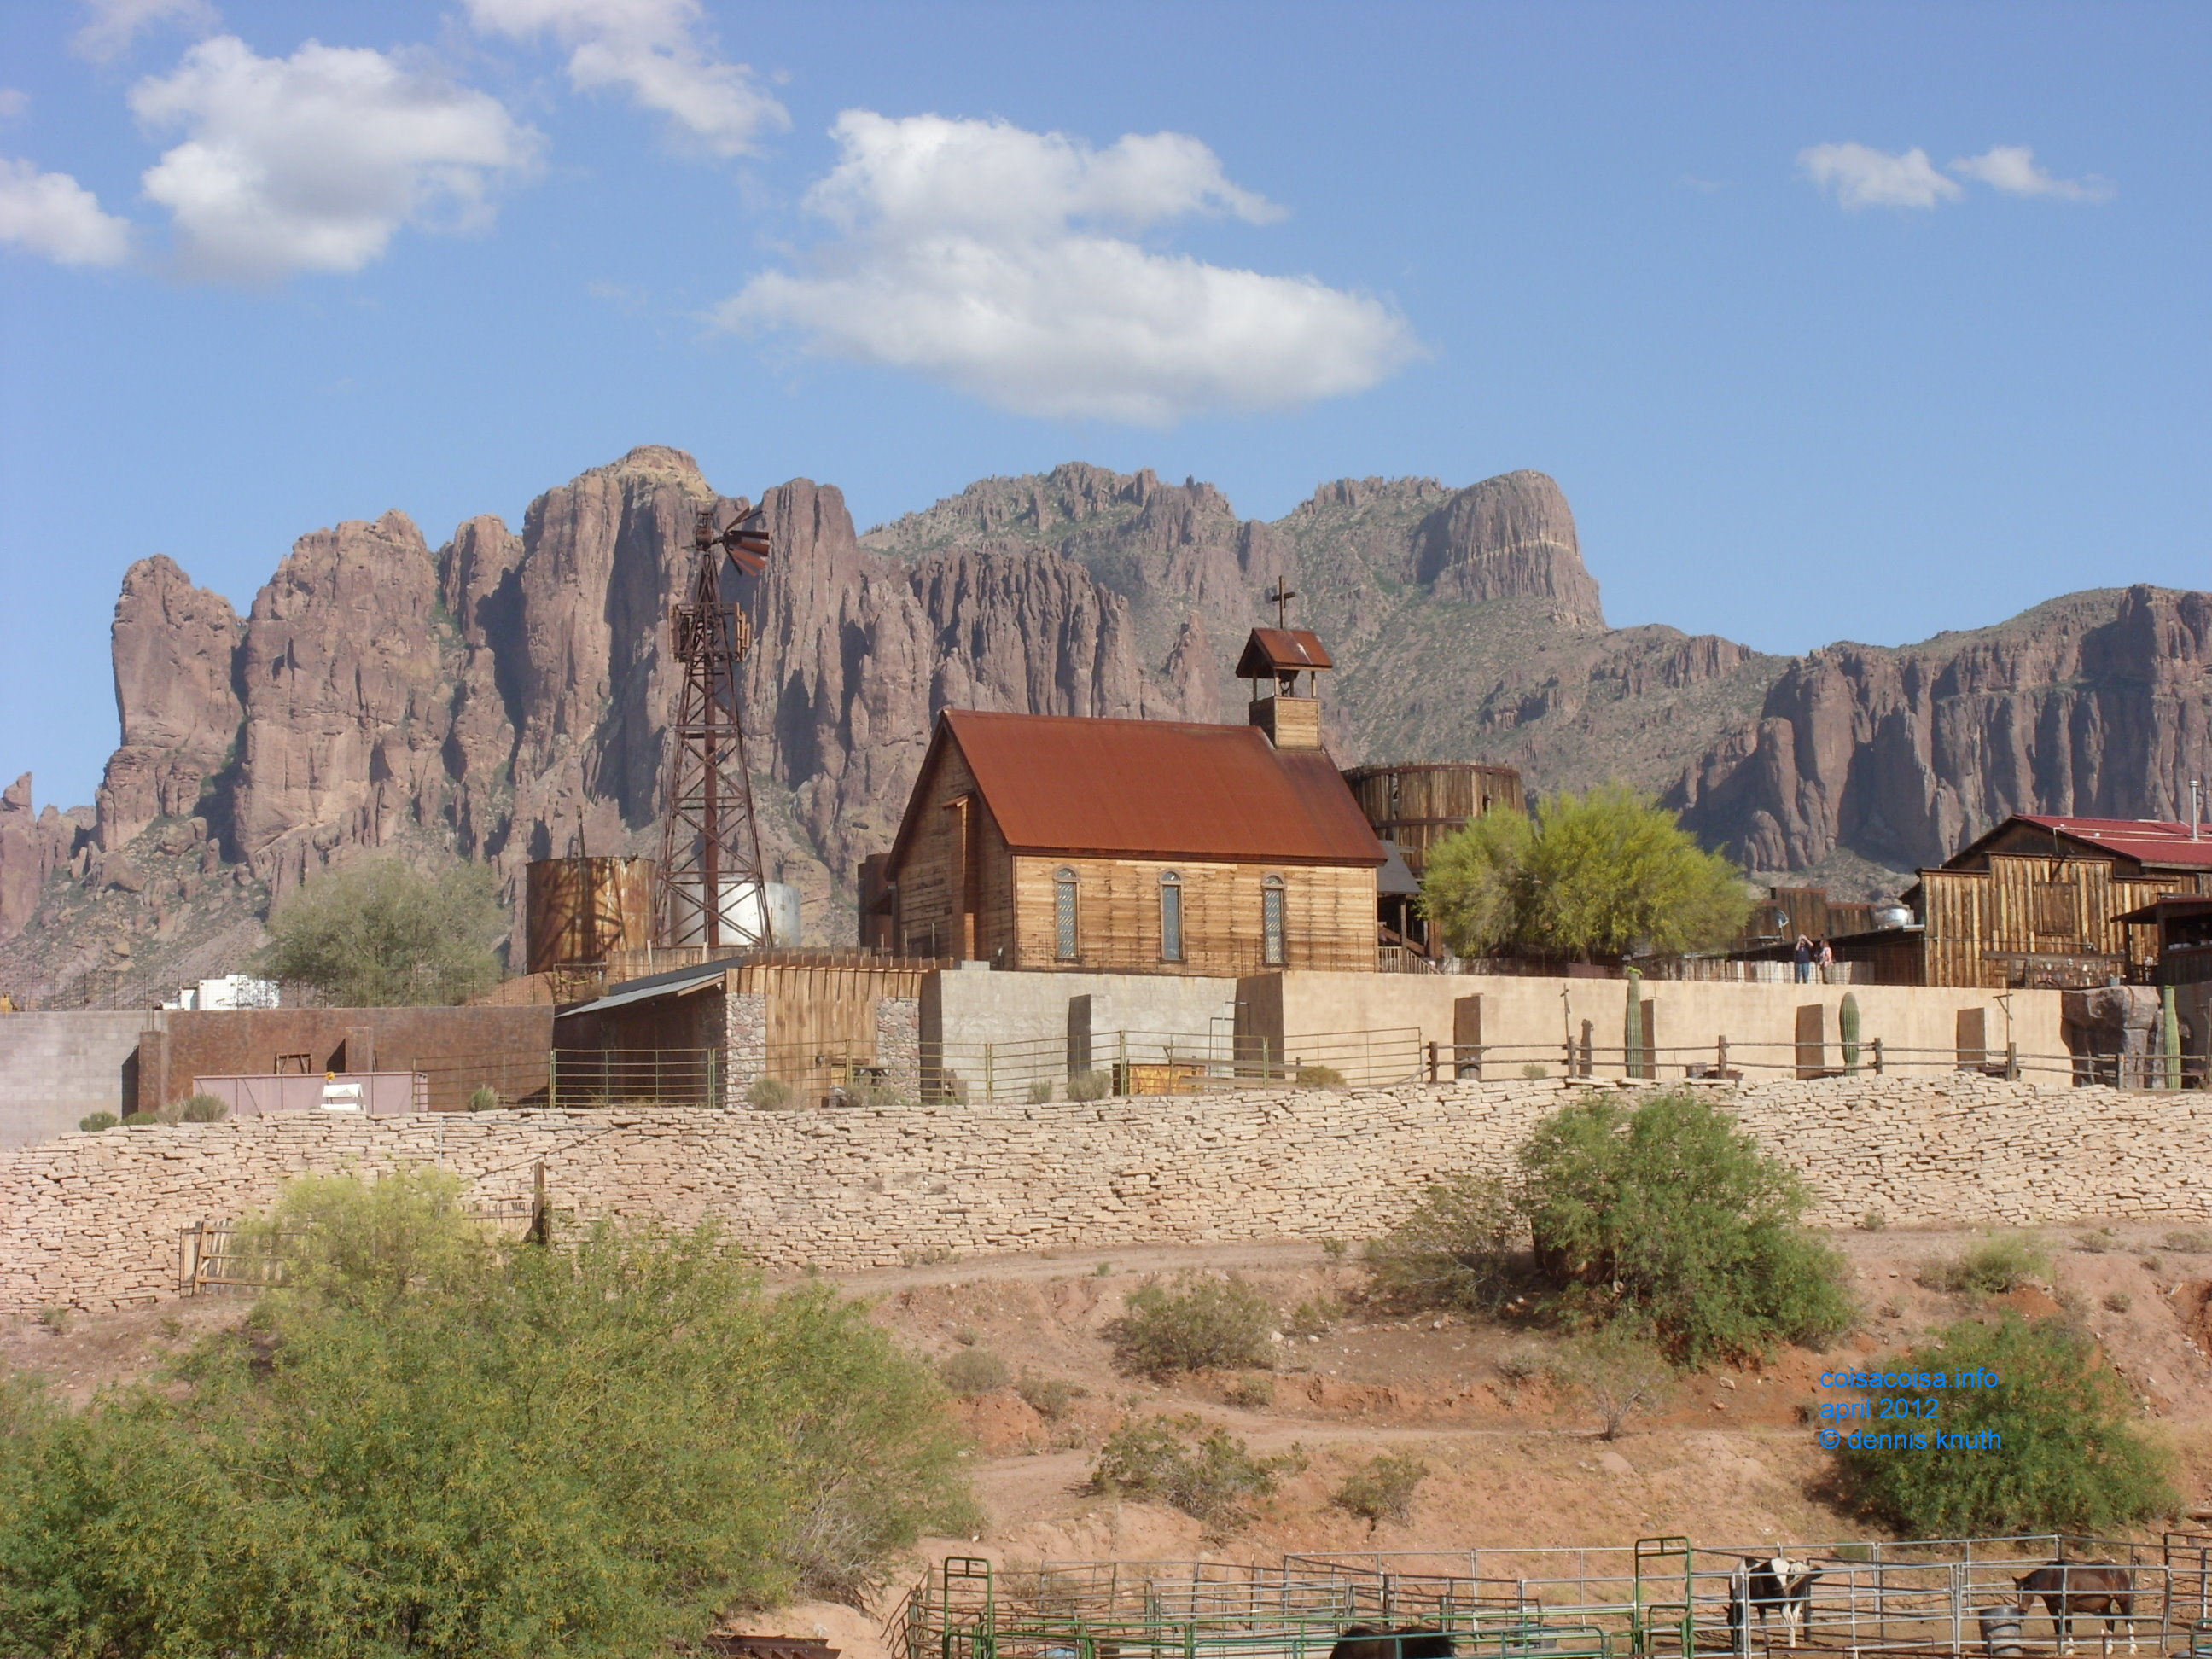 2012_04_26_e_apache_junction_ghost_town_0021.jpg (large)